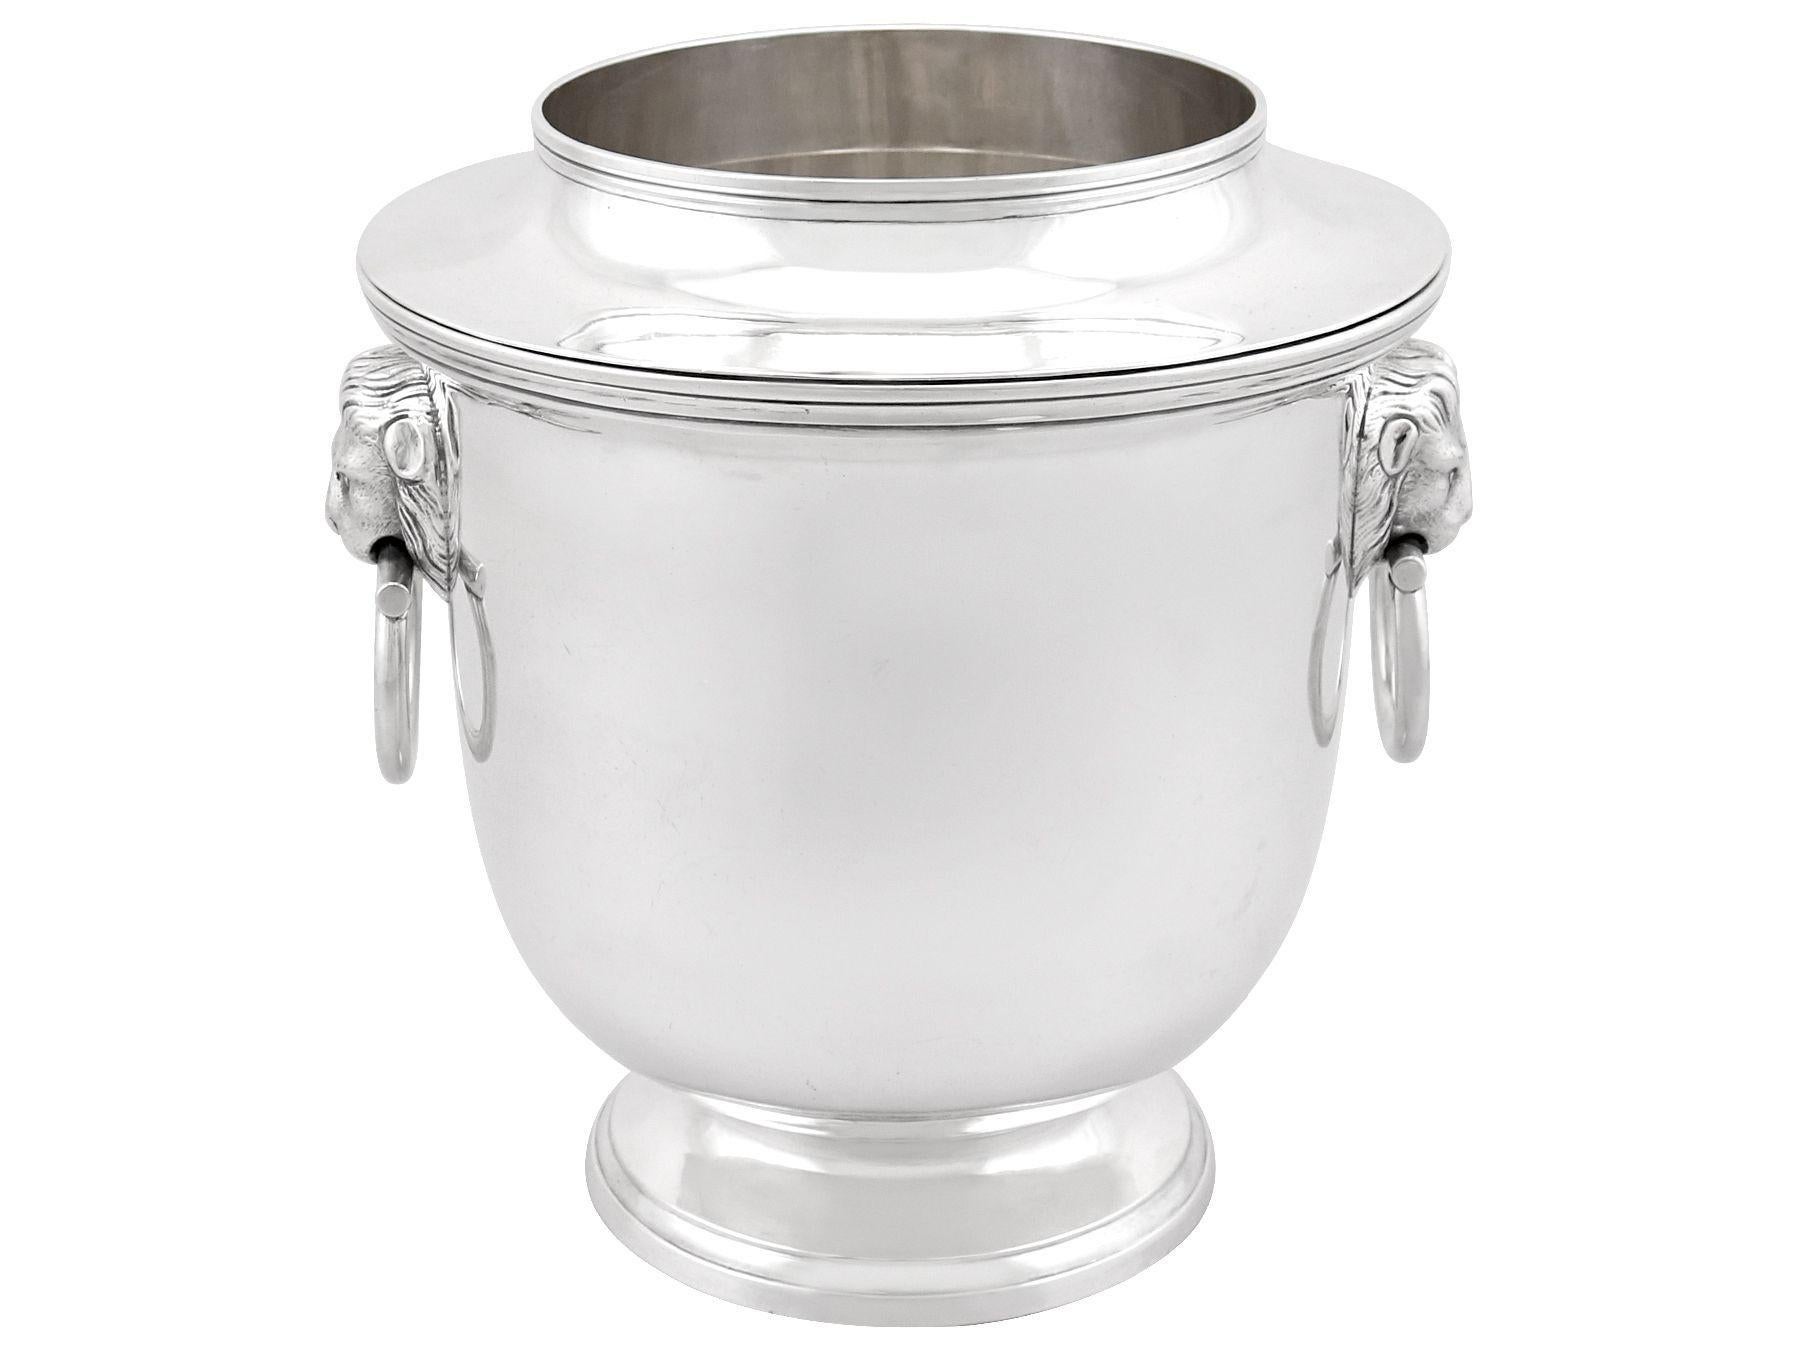 Antique George III Sterling Silver Wine Coolers In Excellent Condition For Sale In Jesmond, Newcastle Upon Tyne